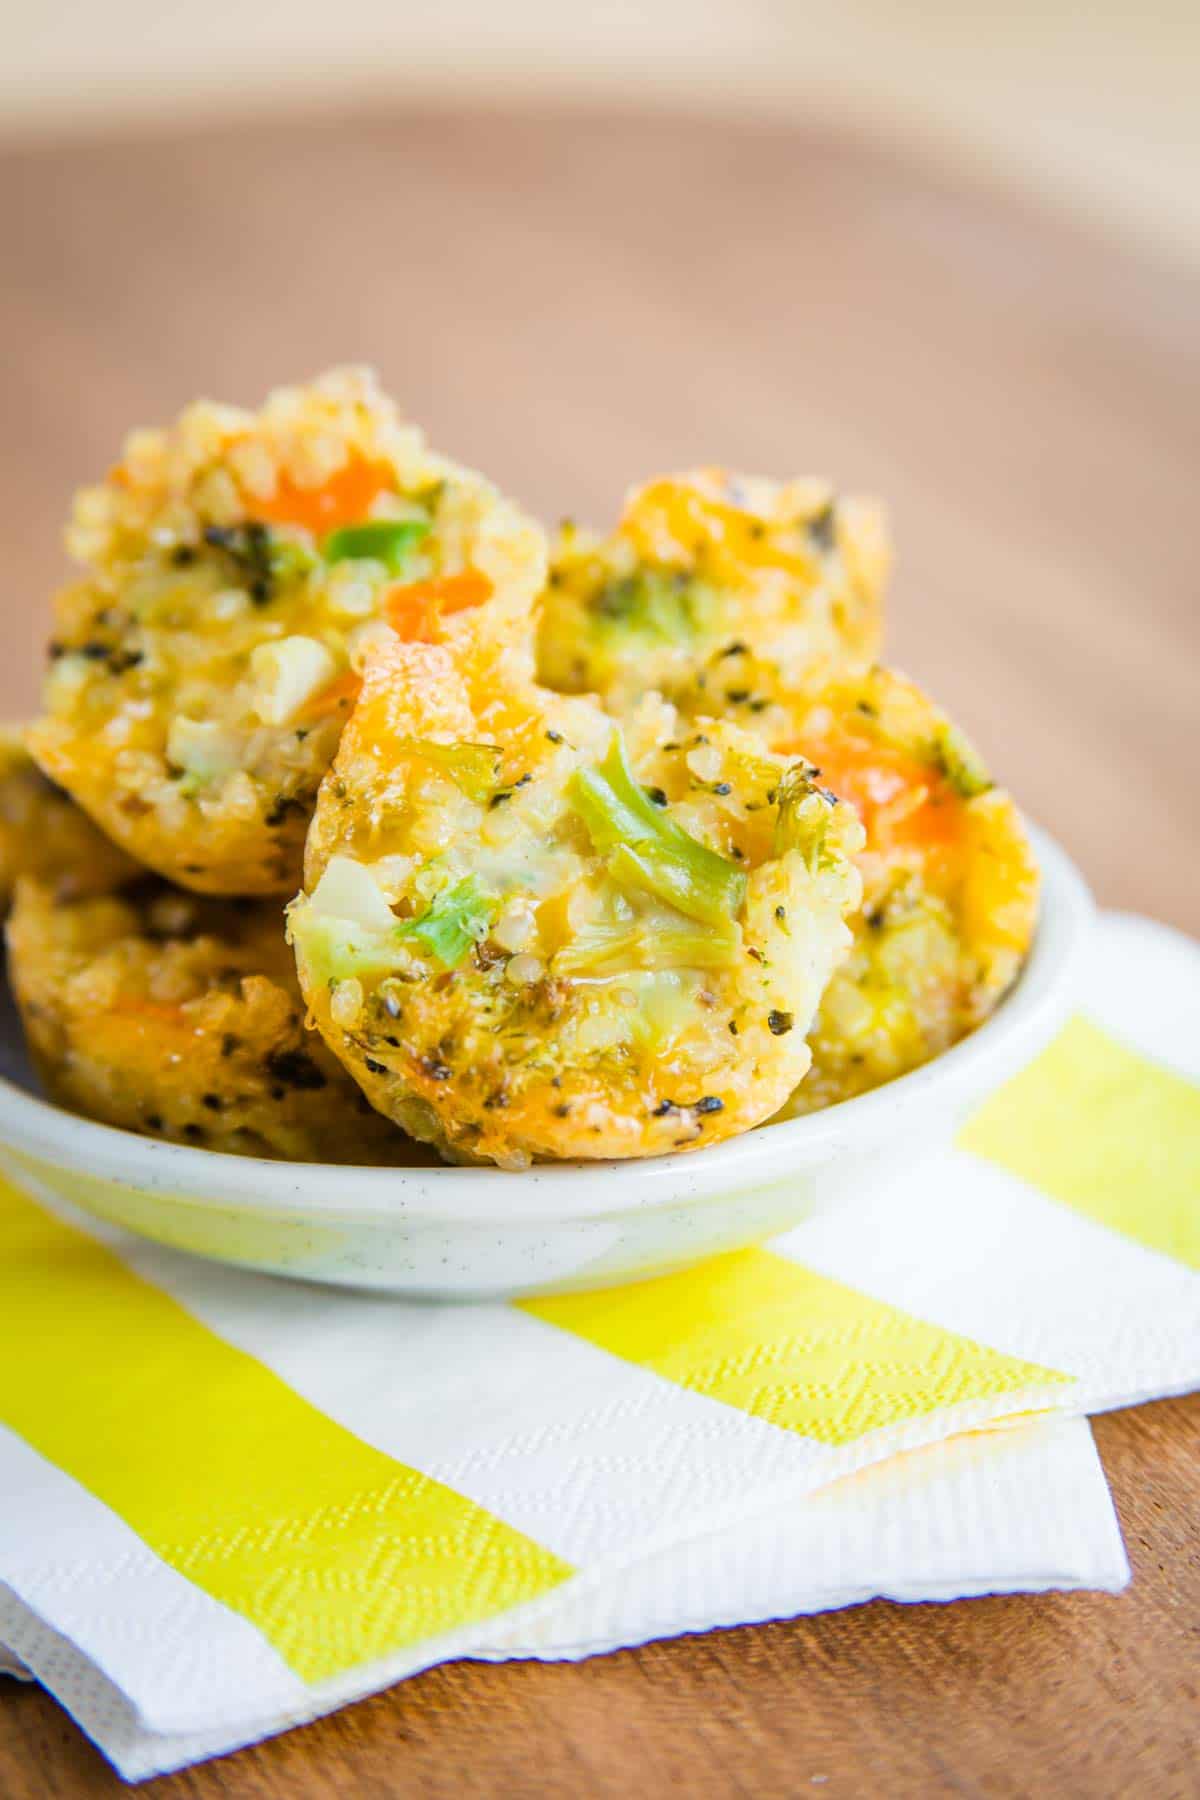 Cheesy Veggie Quinoa Bites in a small bowl on top of yellow and white napkins on a wooden tabletop.